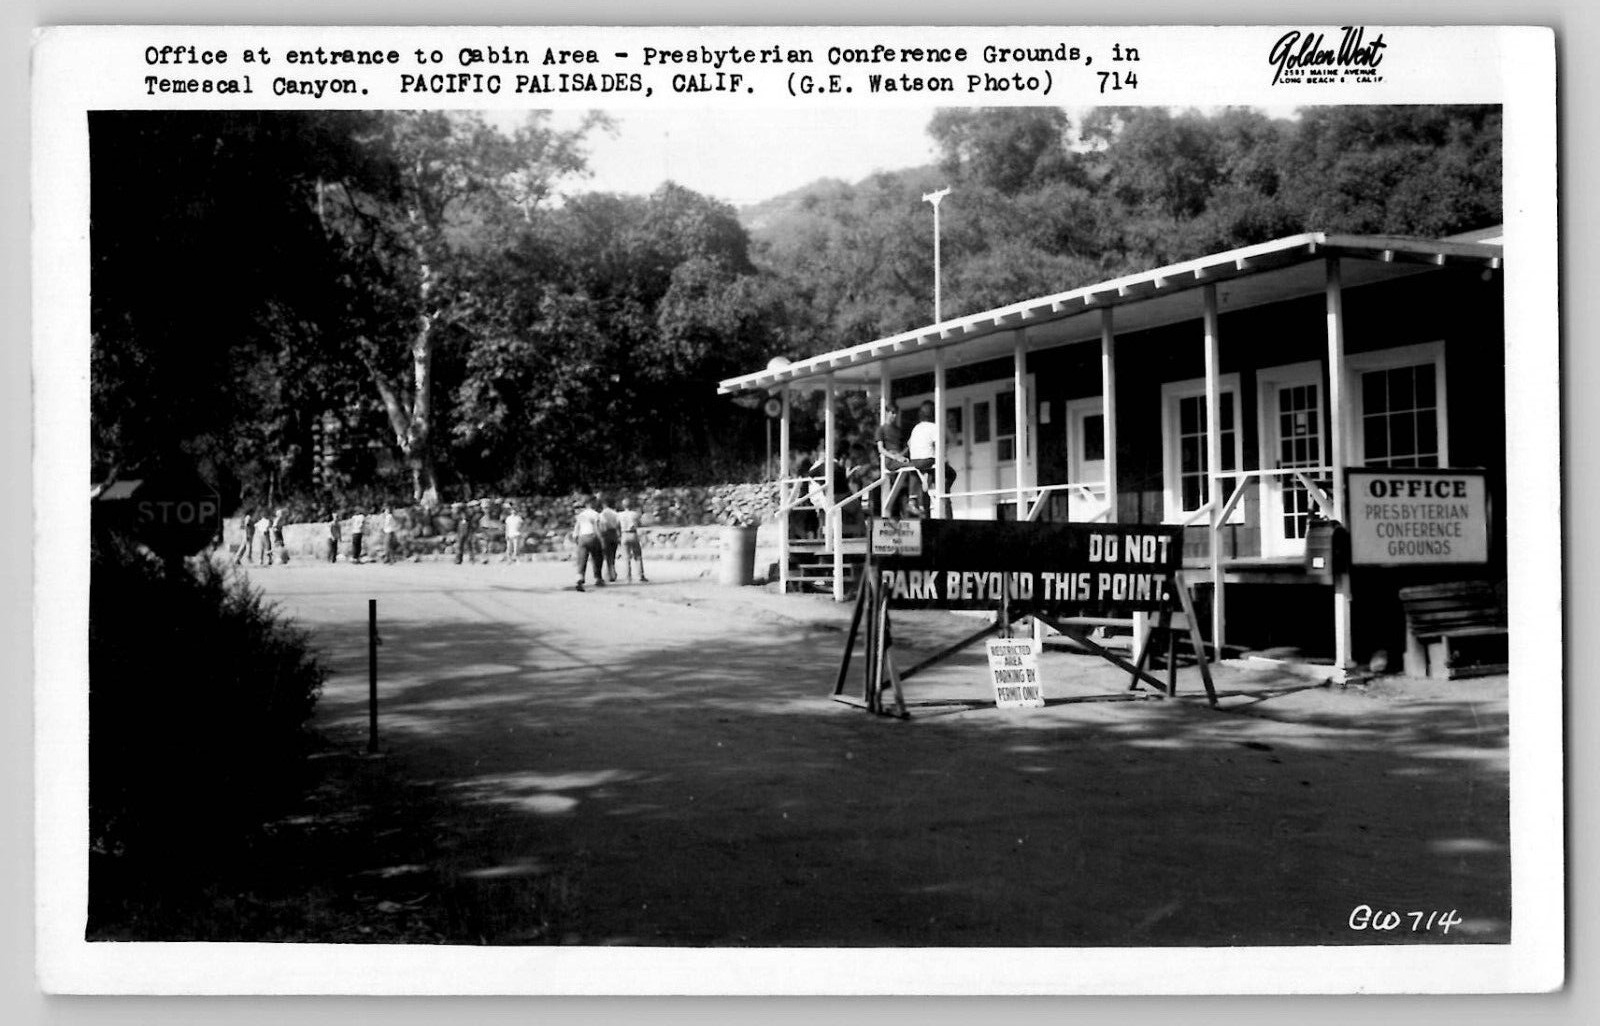 Pacific Palisades CA Presbyterian Conference Grounds Office RPPC Photo Postcard